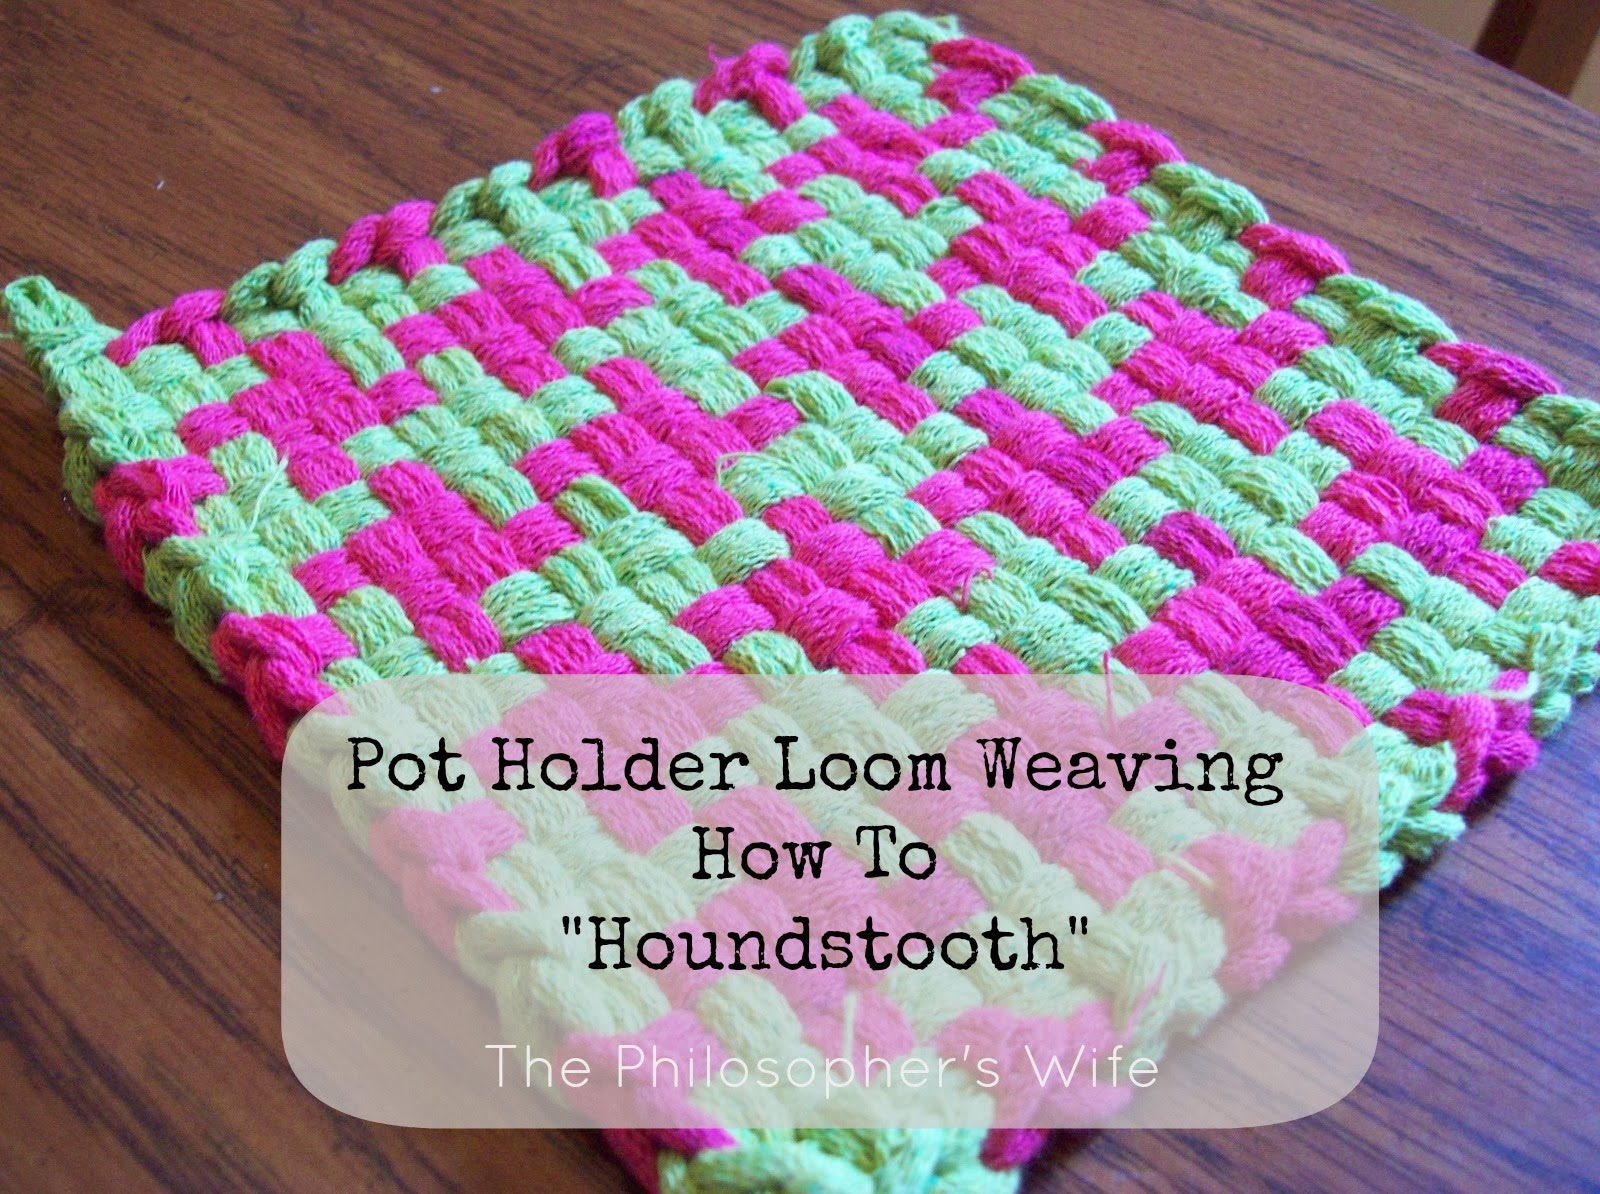 The Philosopher's Wife: Pot Holder Loom Weaving How To -- Houndstooth